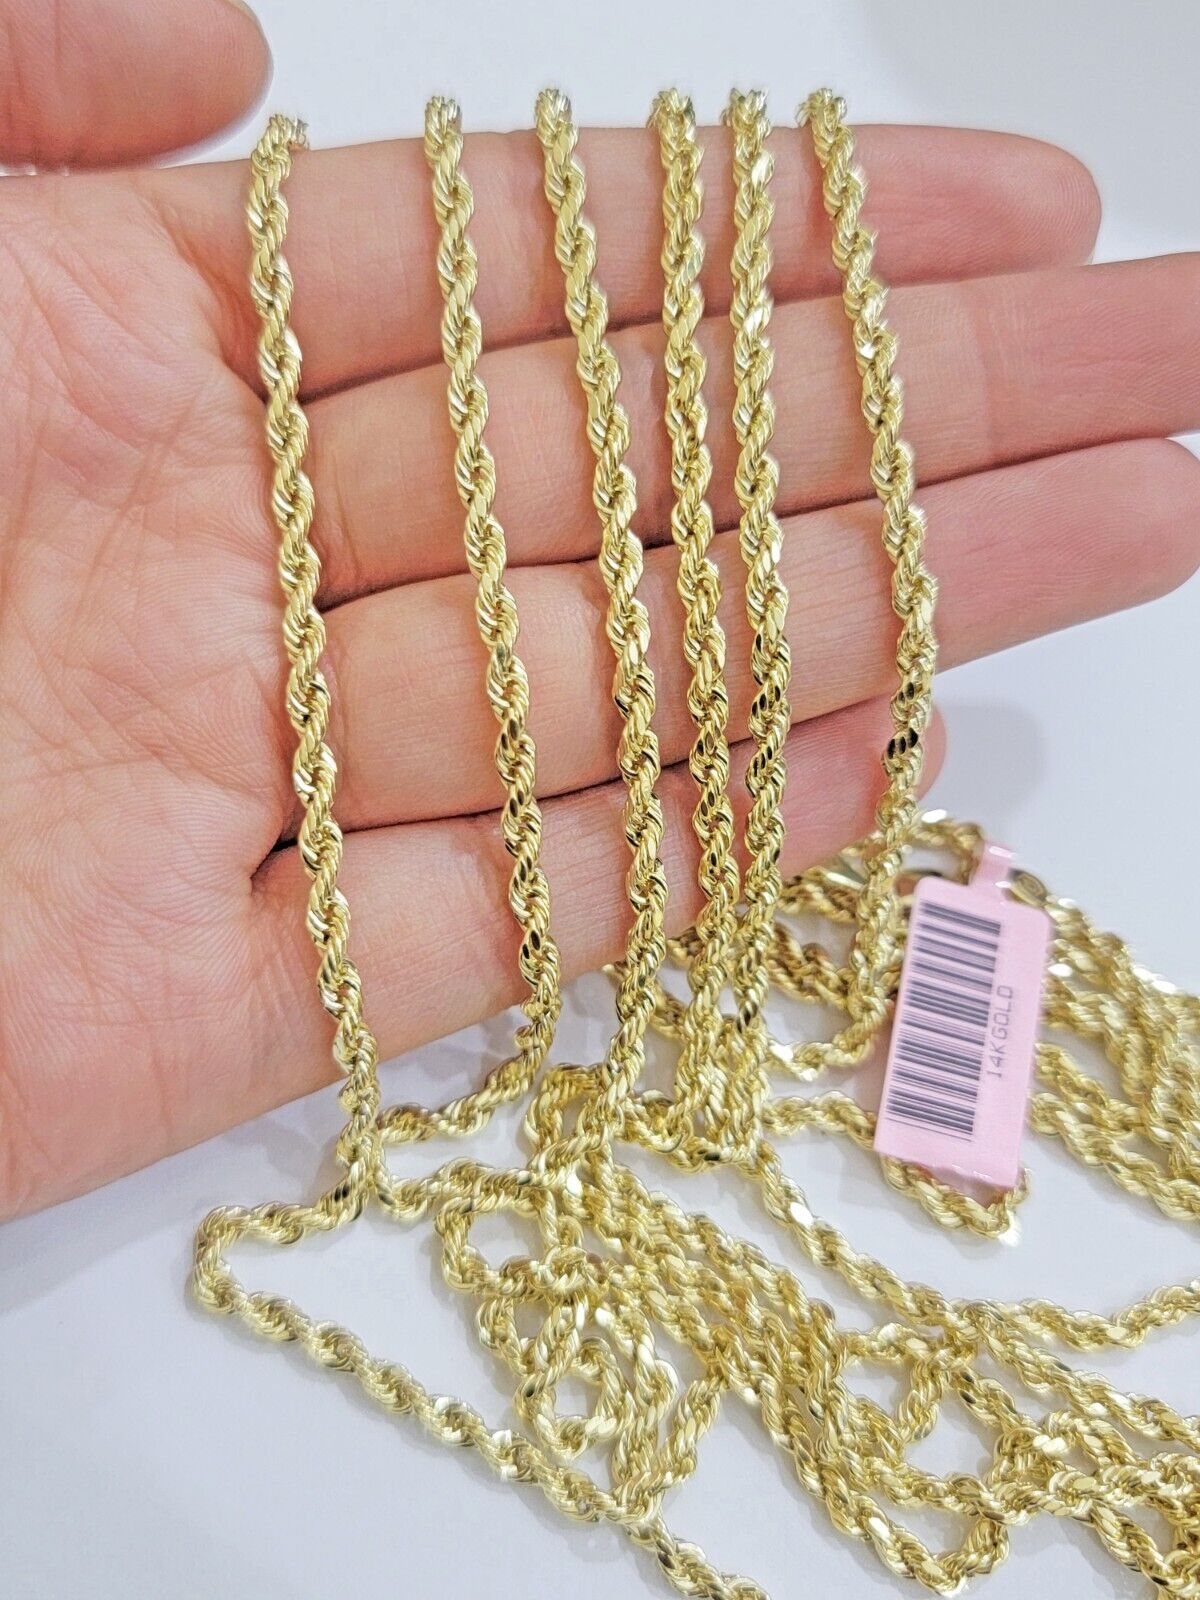 Real 14k Yellow Gold Rope chain necklace 2.5mm 3mm 4mm 5mm 18-26 Inch Men women